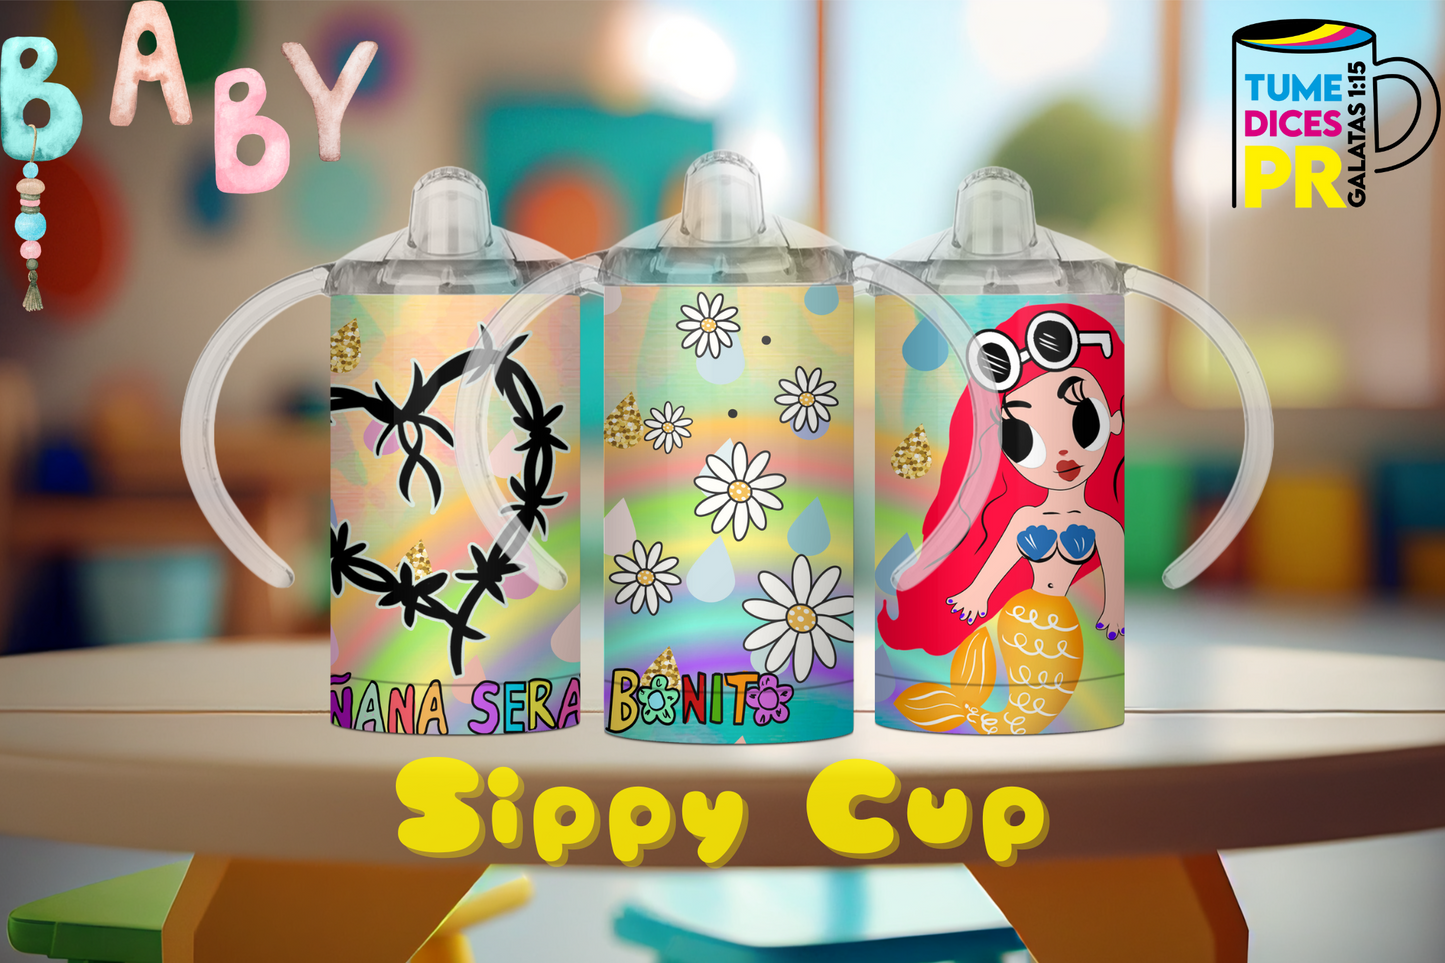 Sippy Cup 2